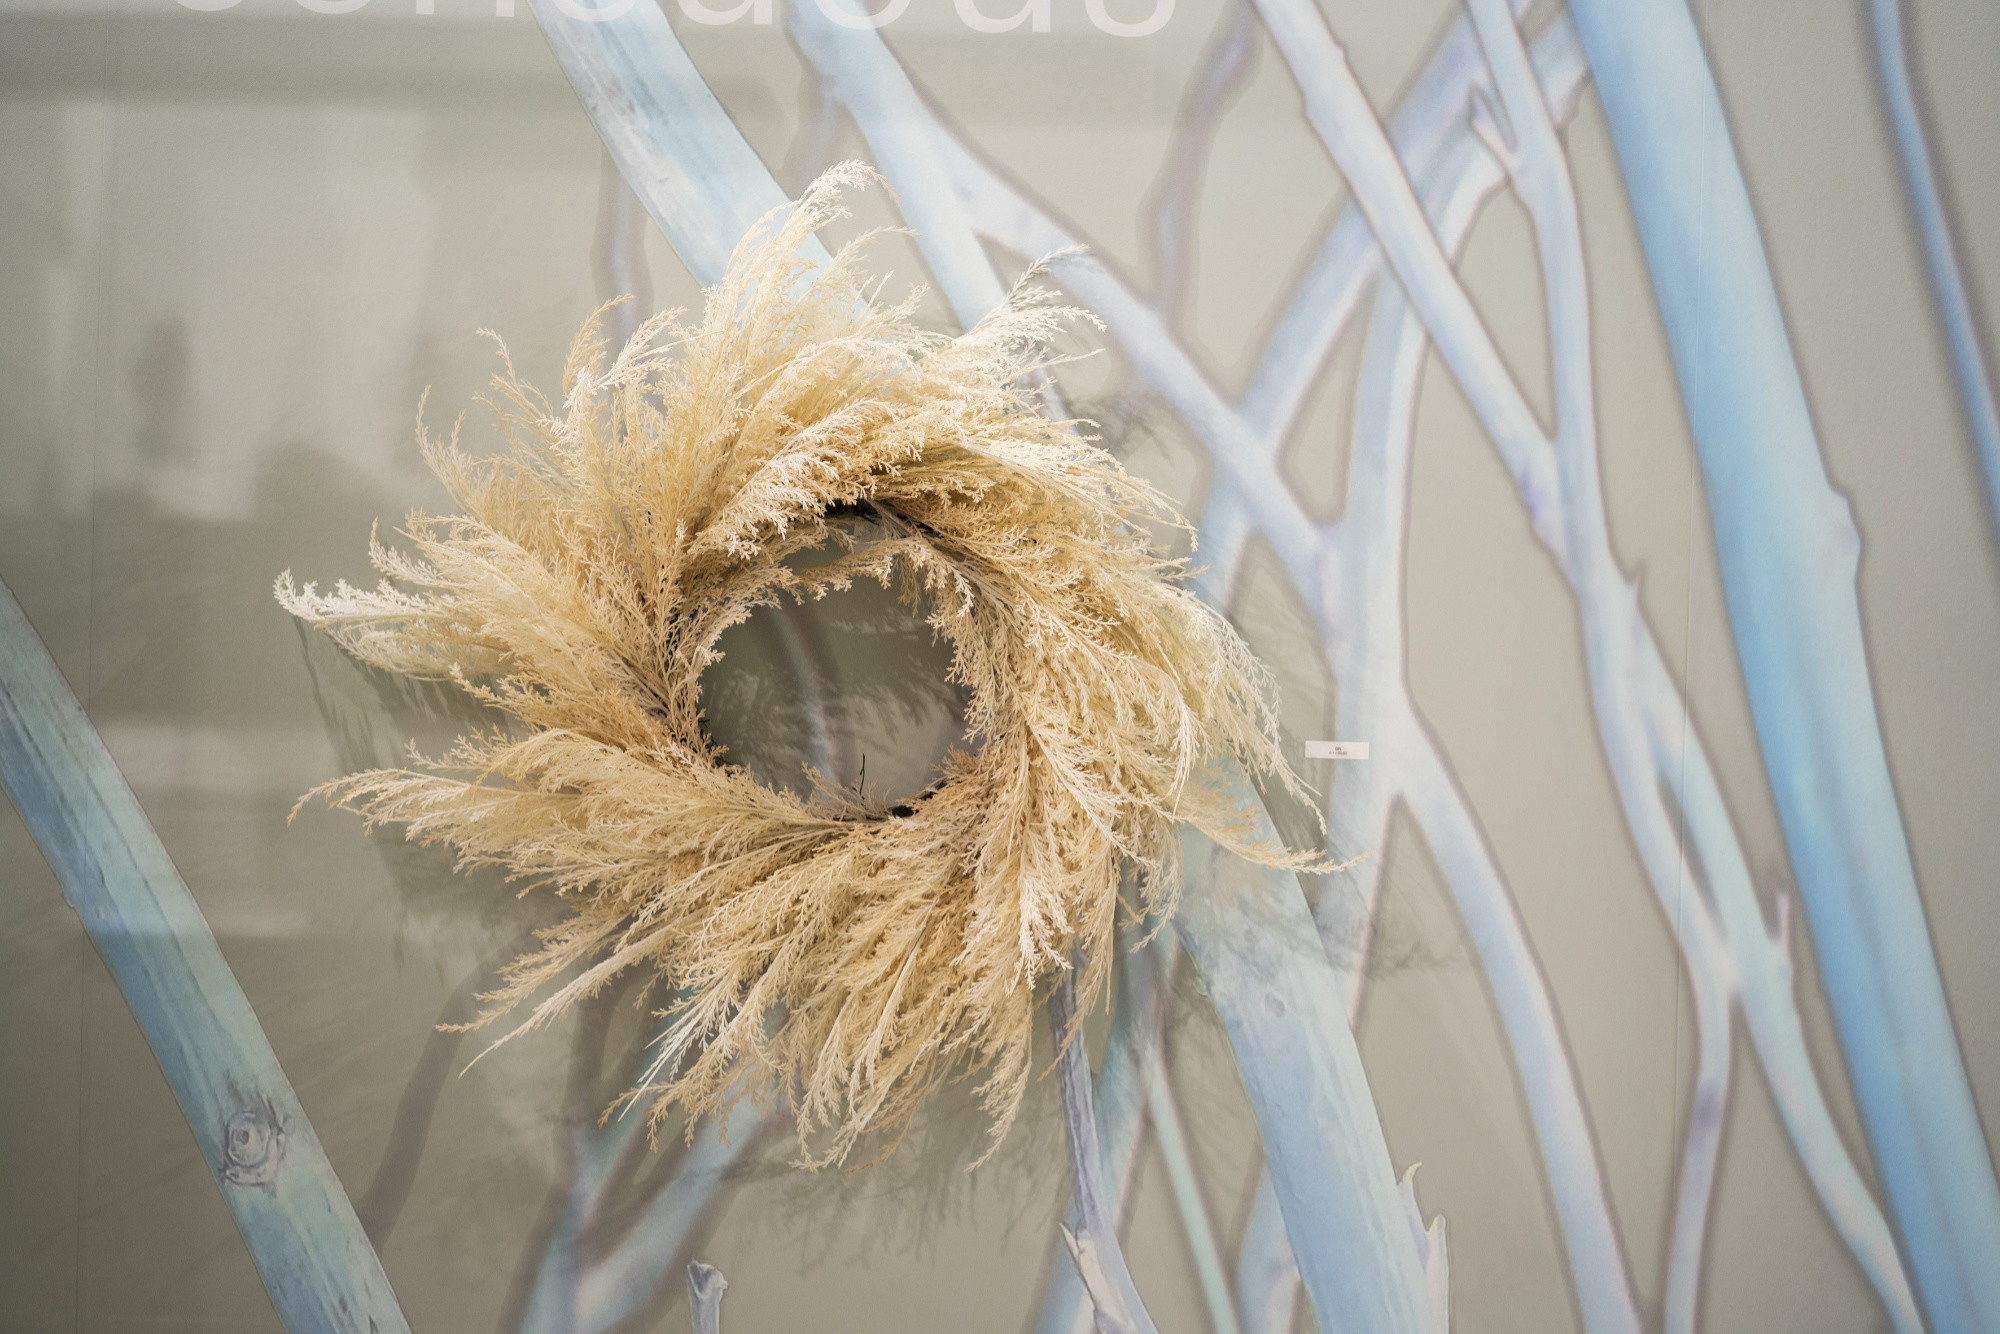 Wall art with decorative grasses: Natural beauty for interior design. Photo: Messe Frankfurt